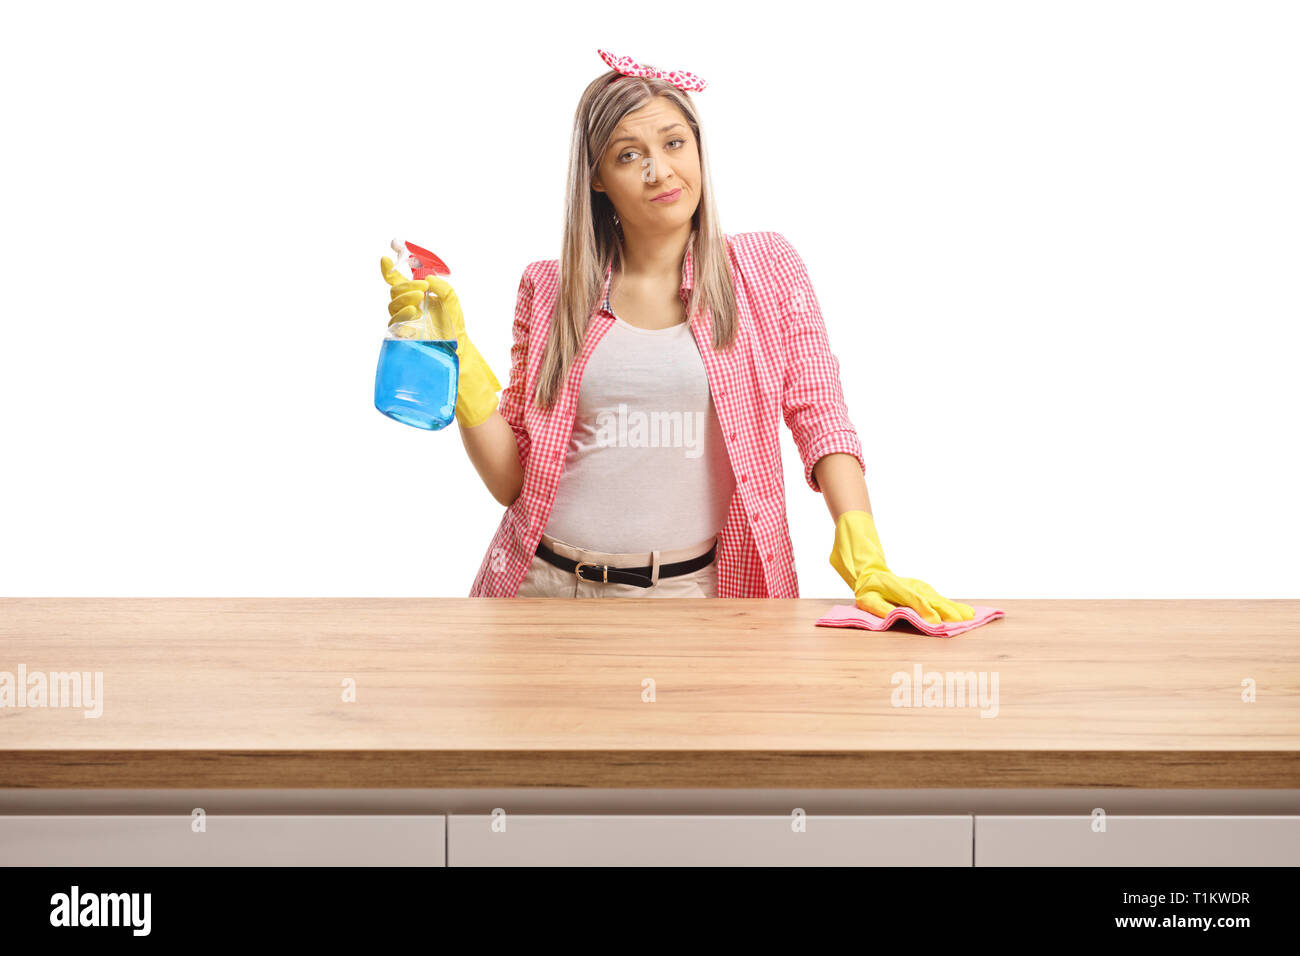 Young woman behind a wooden counter fed up of cleaning isolated on white background Stock Photo